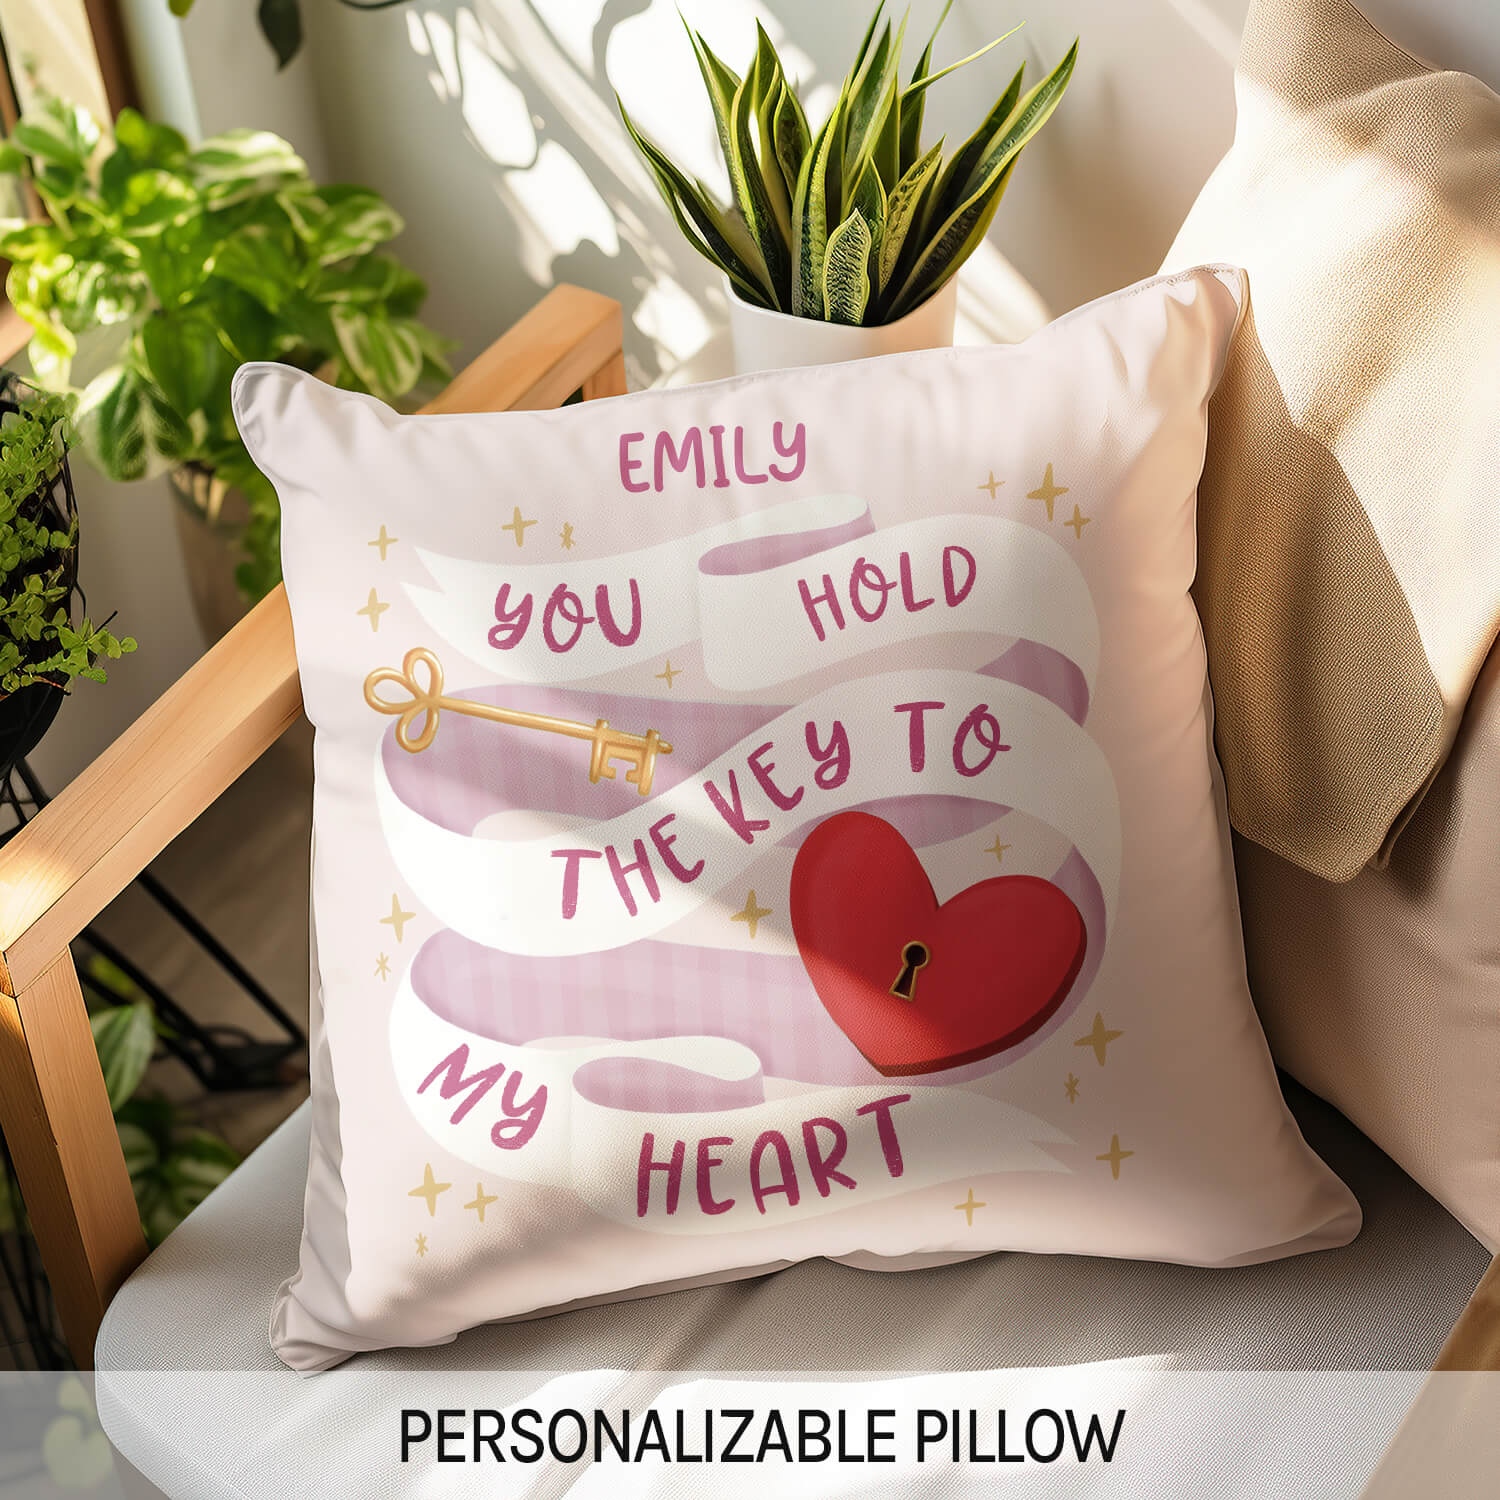 You Hold The Key To My Heart - Personalized Anniversary or Valentine's Day gift For Boyfriend or Girlfriend - Custom Pillow - MyMindfulGifts